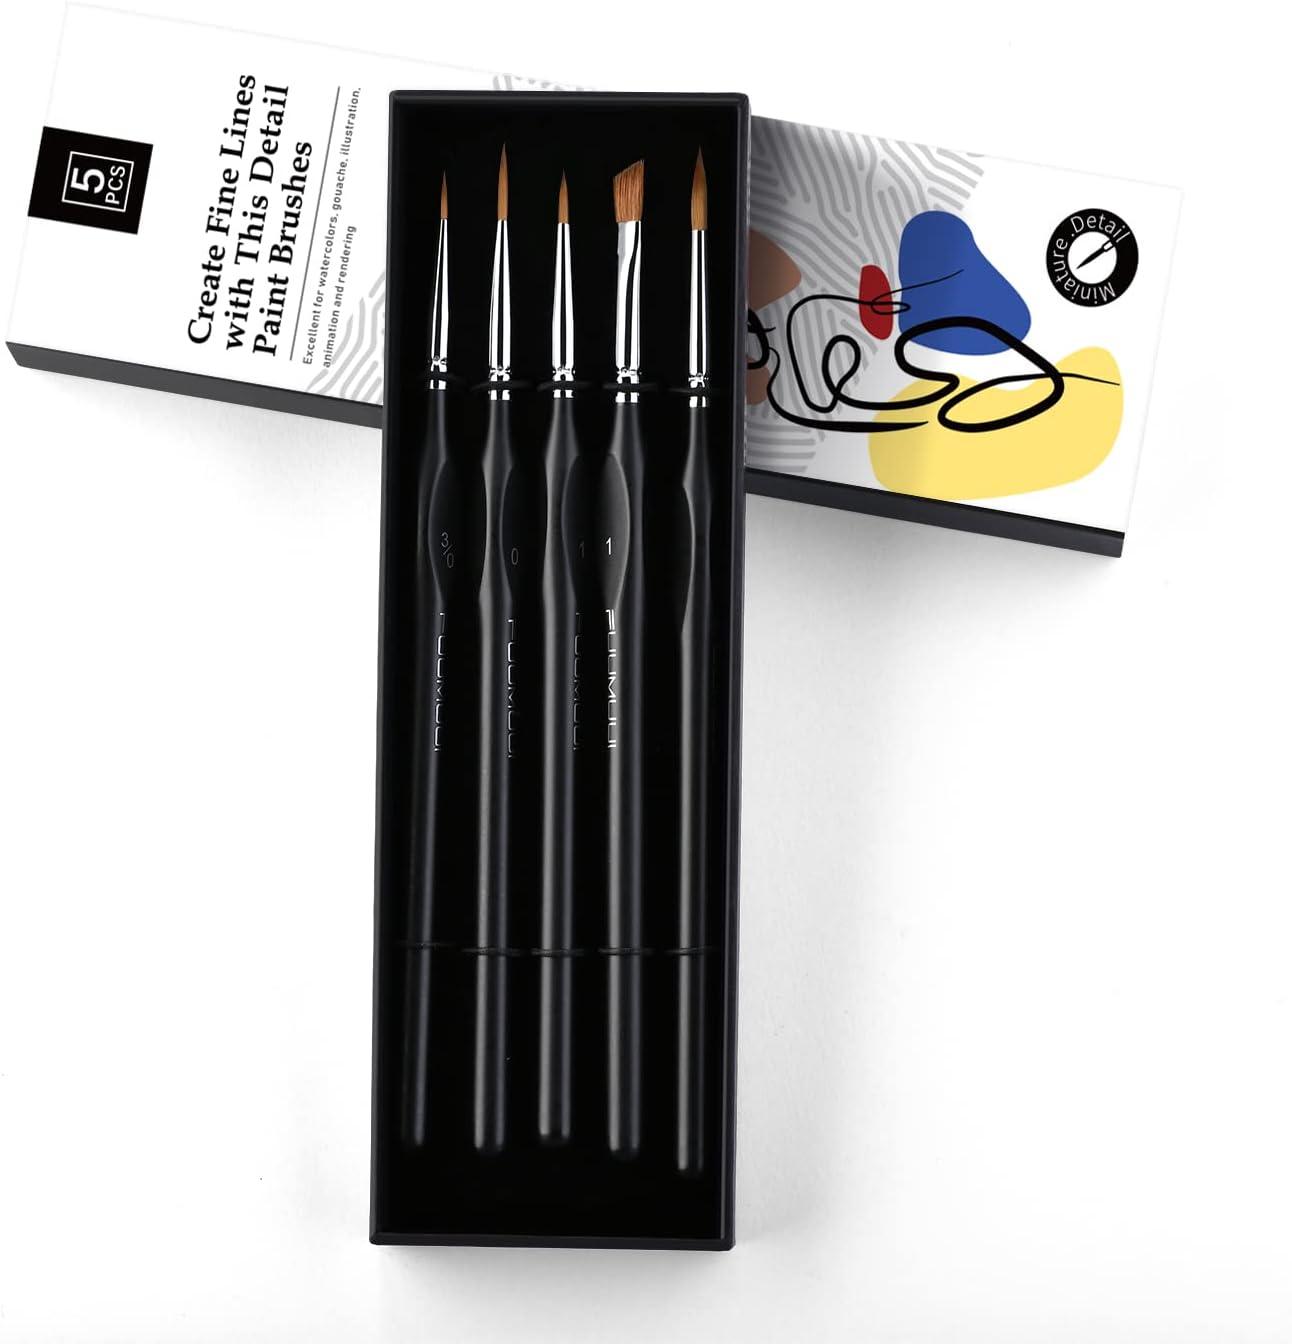 5pcs Fine Tip Art Painting Brush Set For Watercolor, Oil Painting